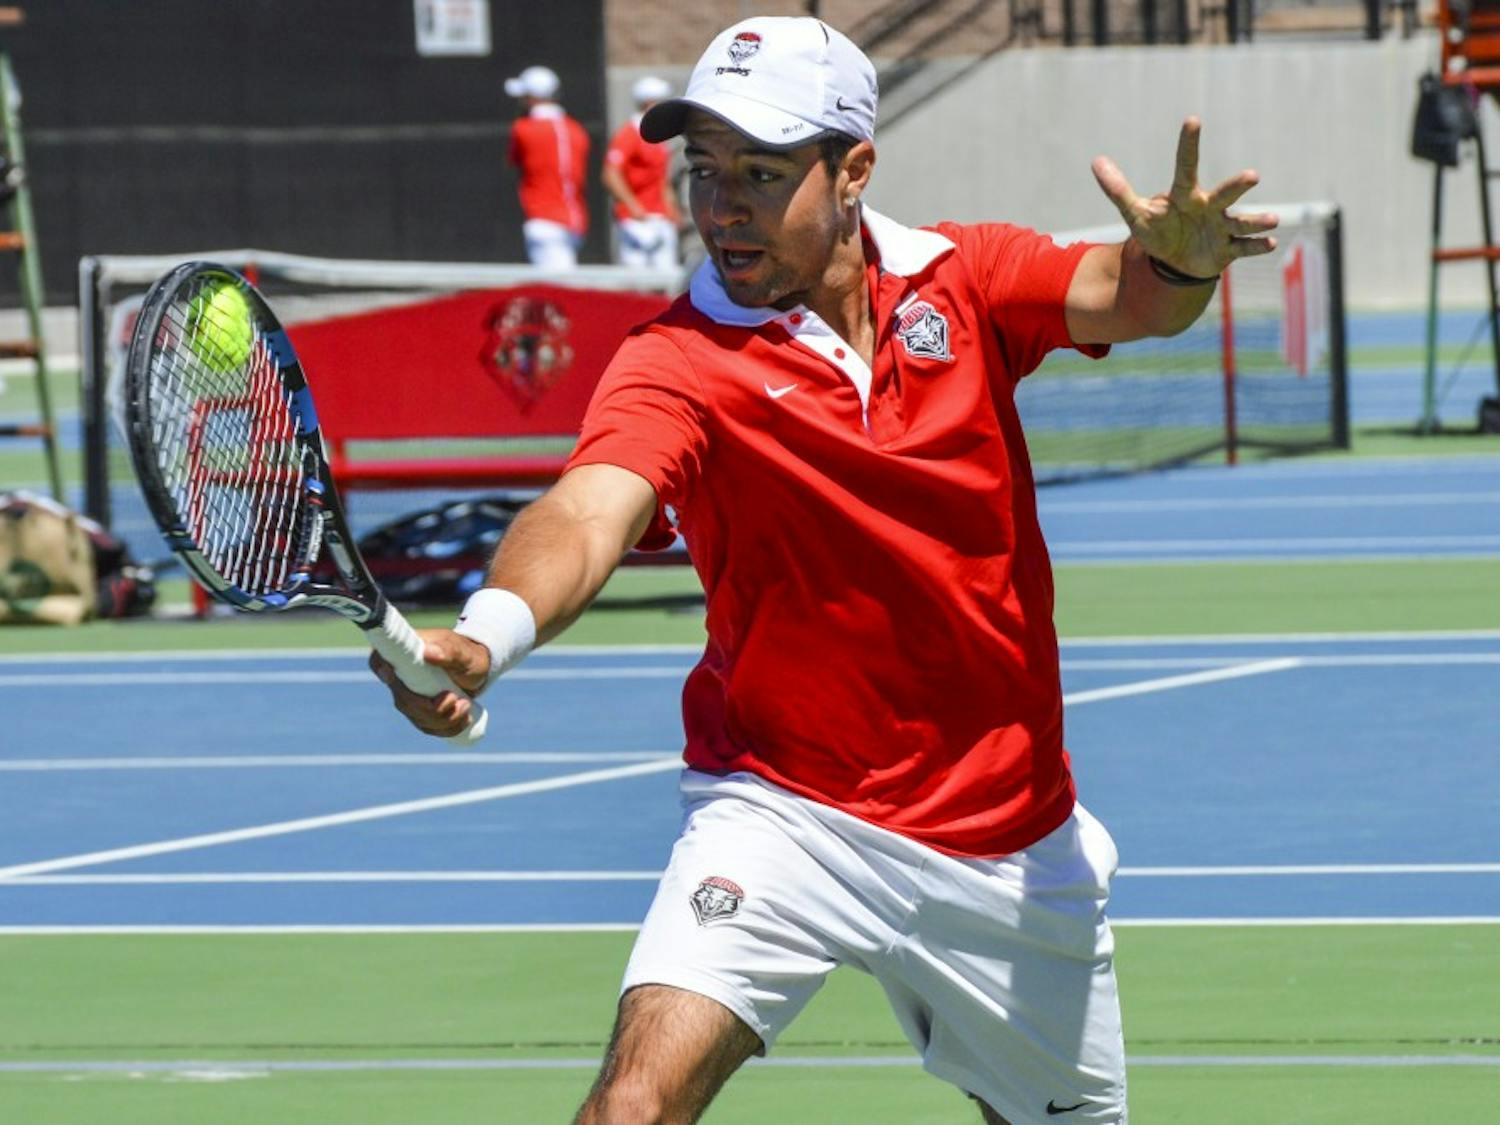 Redshirt junior Rodolfo Jauregui hits the ball back to a Denver player Sunday afternoon at the McKinnon Family Tennis Stadium. The Lobos lost to Denver and will be heading into the Mountain West Championships this week.&nbsp;